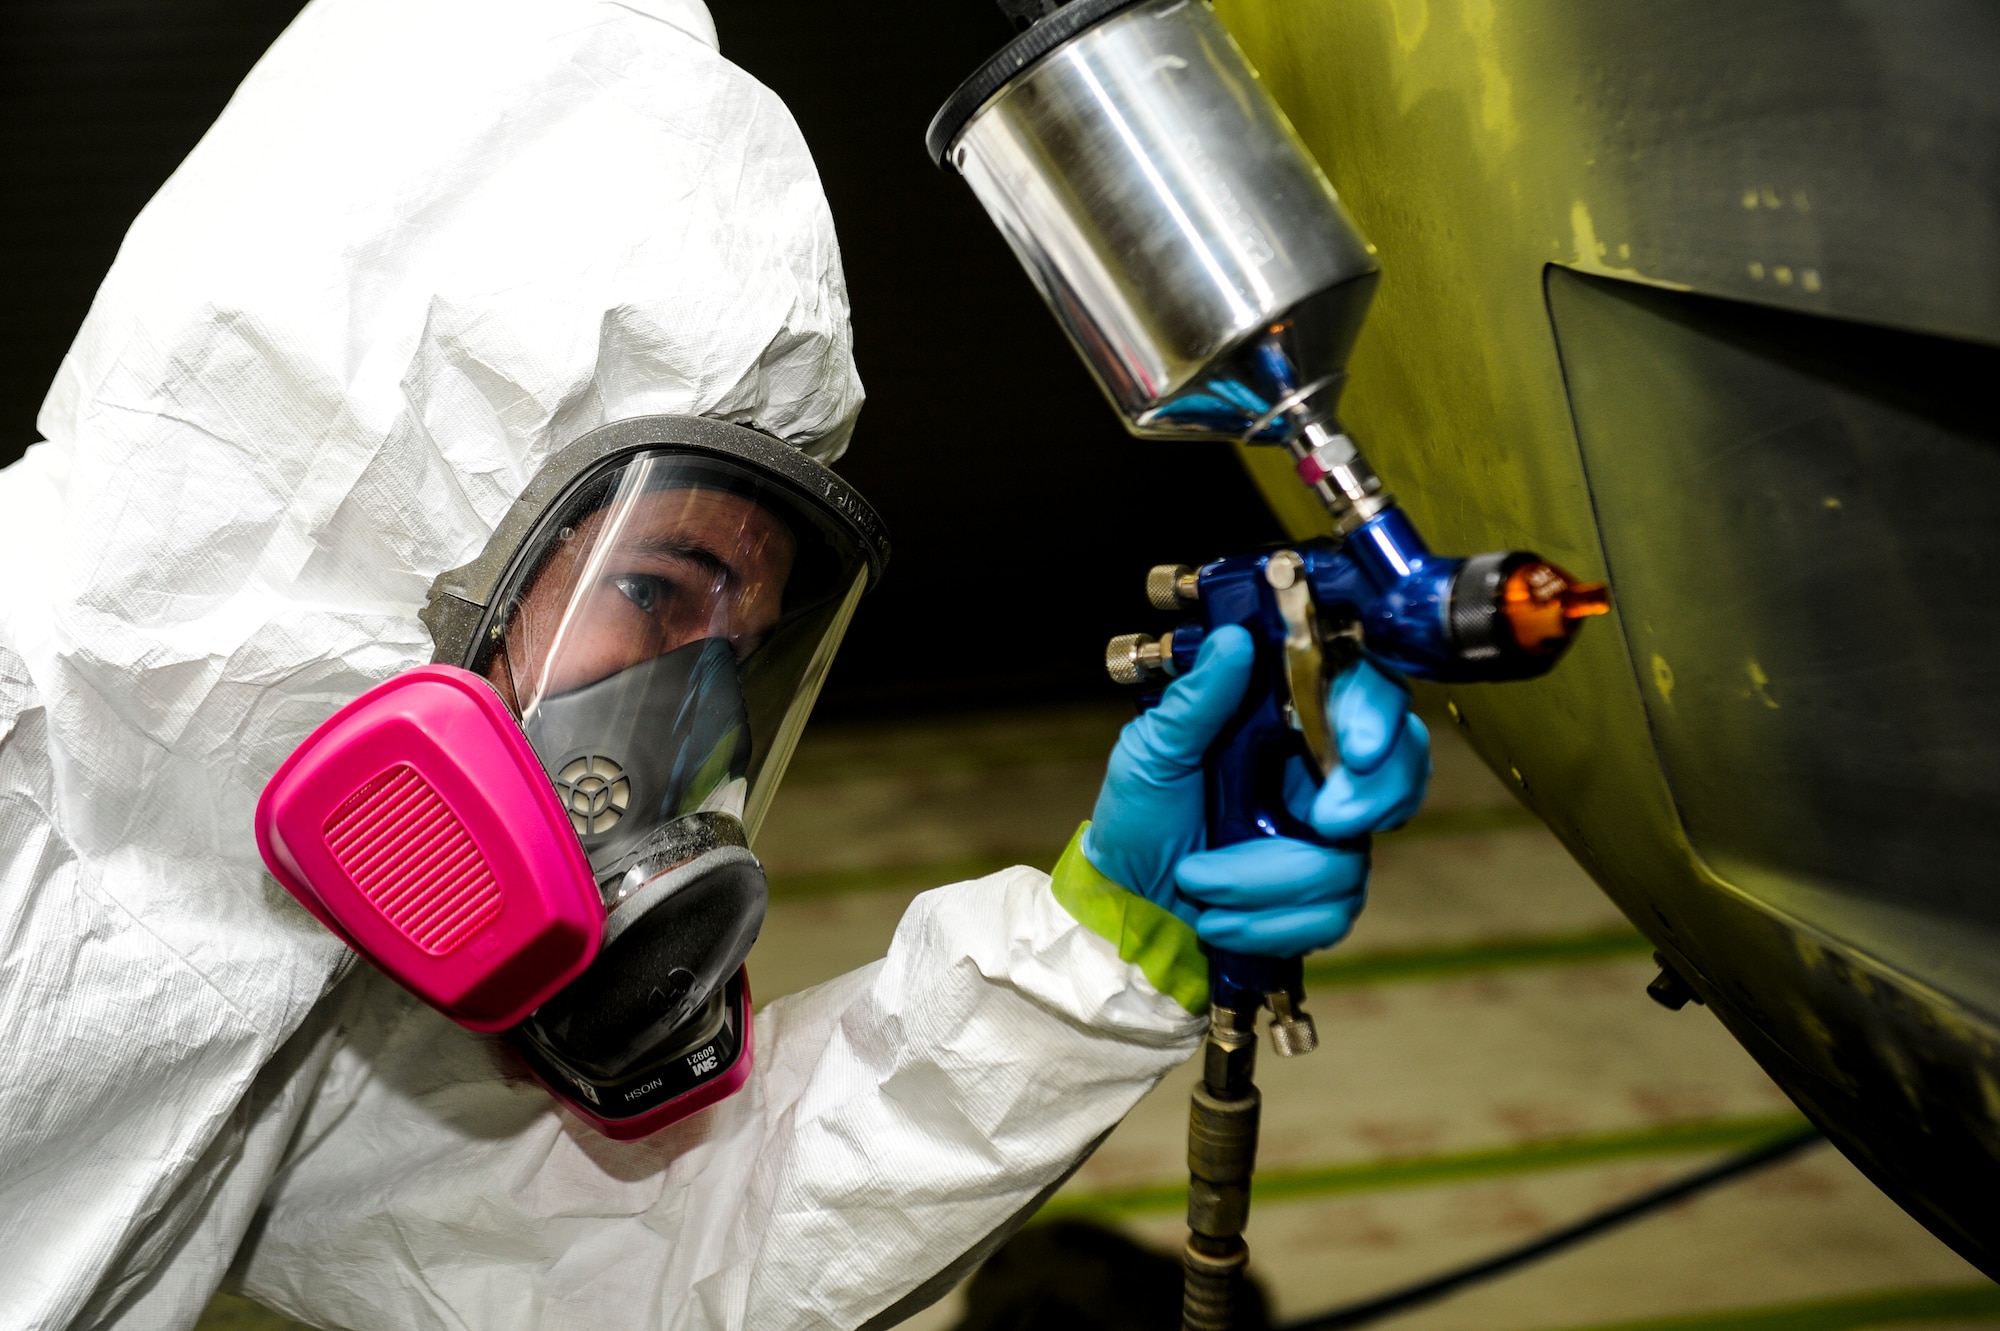 U.S. Air Force Senior Airman Timothy Jones, aircraft structural maintainer from Fabrication Flight, 1st Special Operations Equipment Maintenance Squadron, uses a paint spray gun to add lime green primer to a C-130 engine at the Corrosion Control Facility on Hurlburt Field, Fla., April 25, 2013. The primer is the main source of protection from engine corrosion. (U.S. Air Force photo/Airman 1st Class Christopher Callaway)